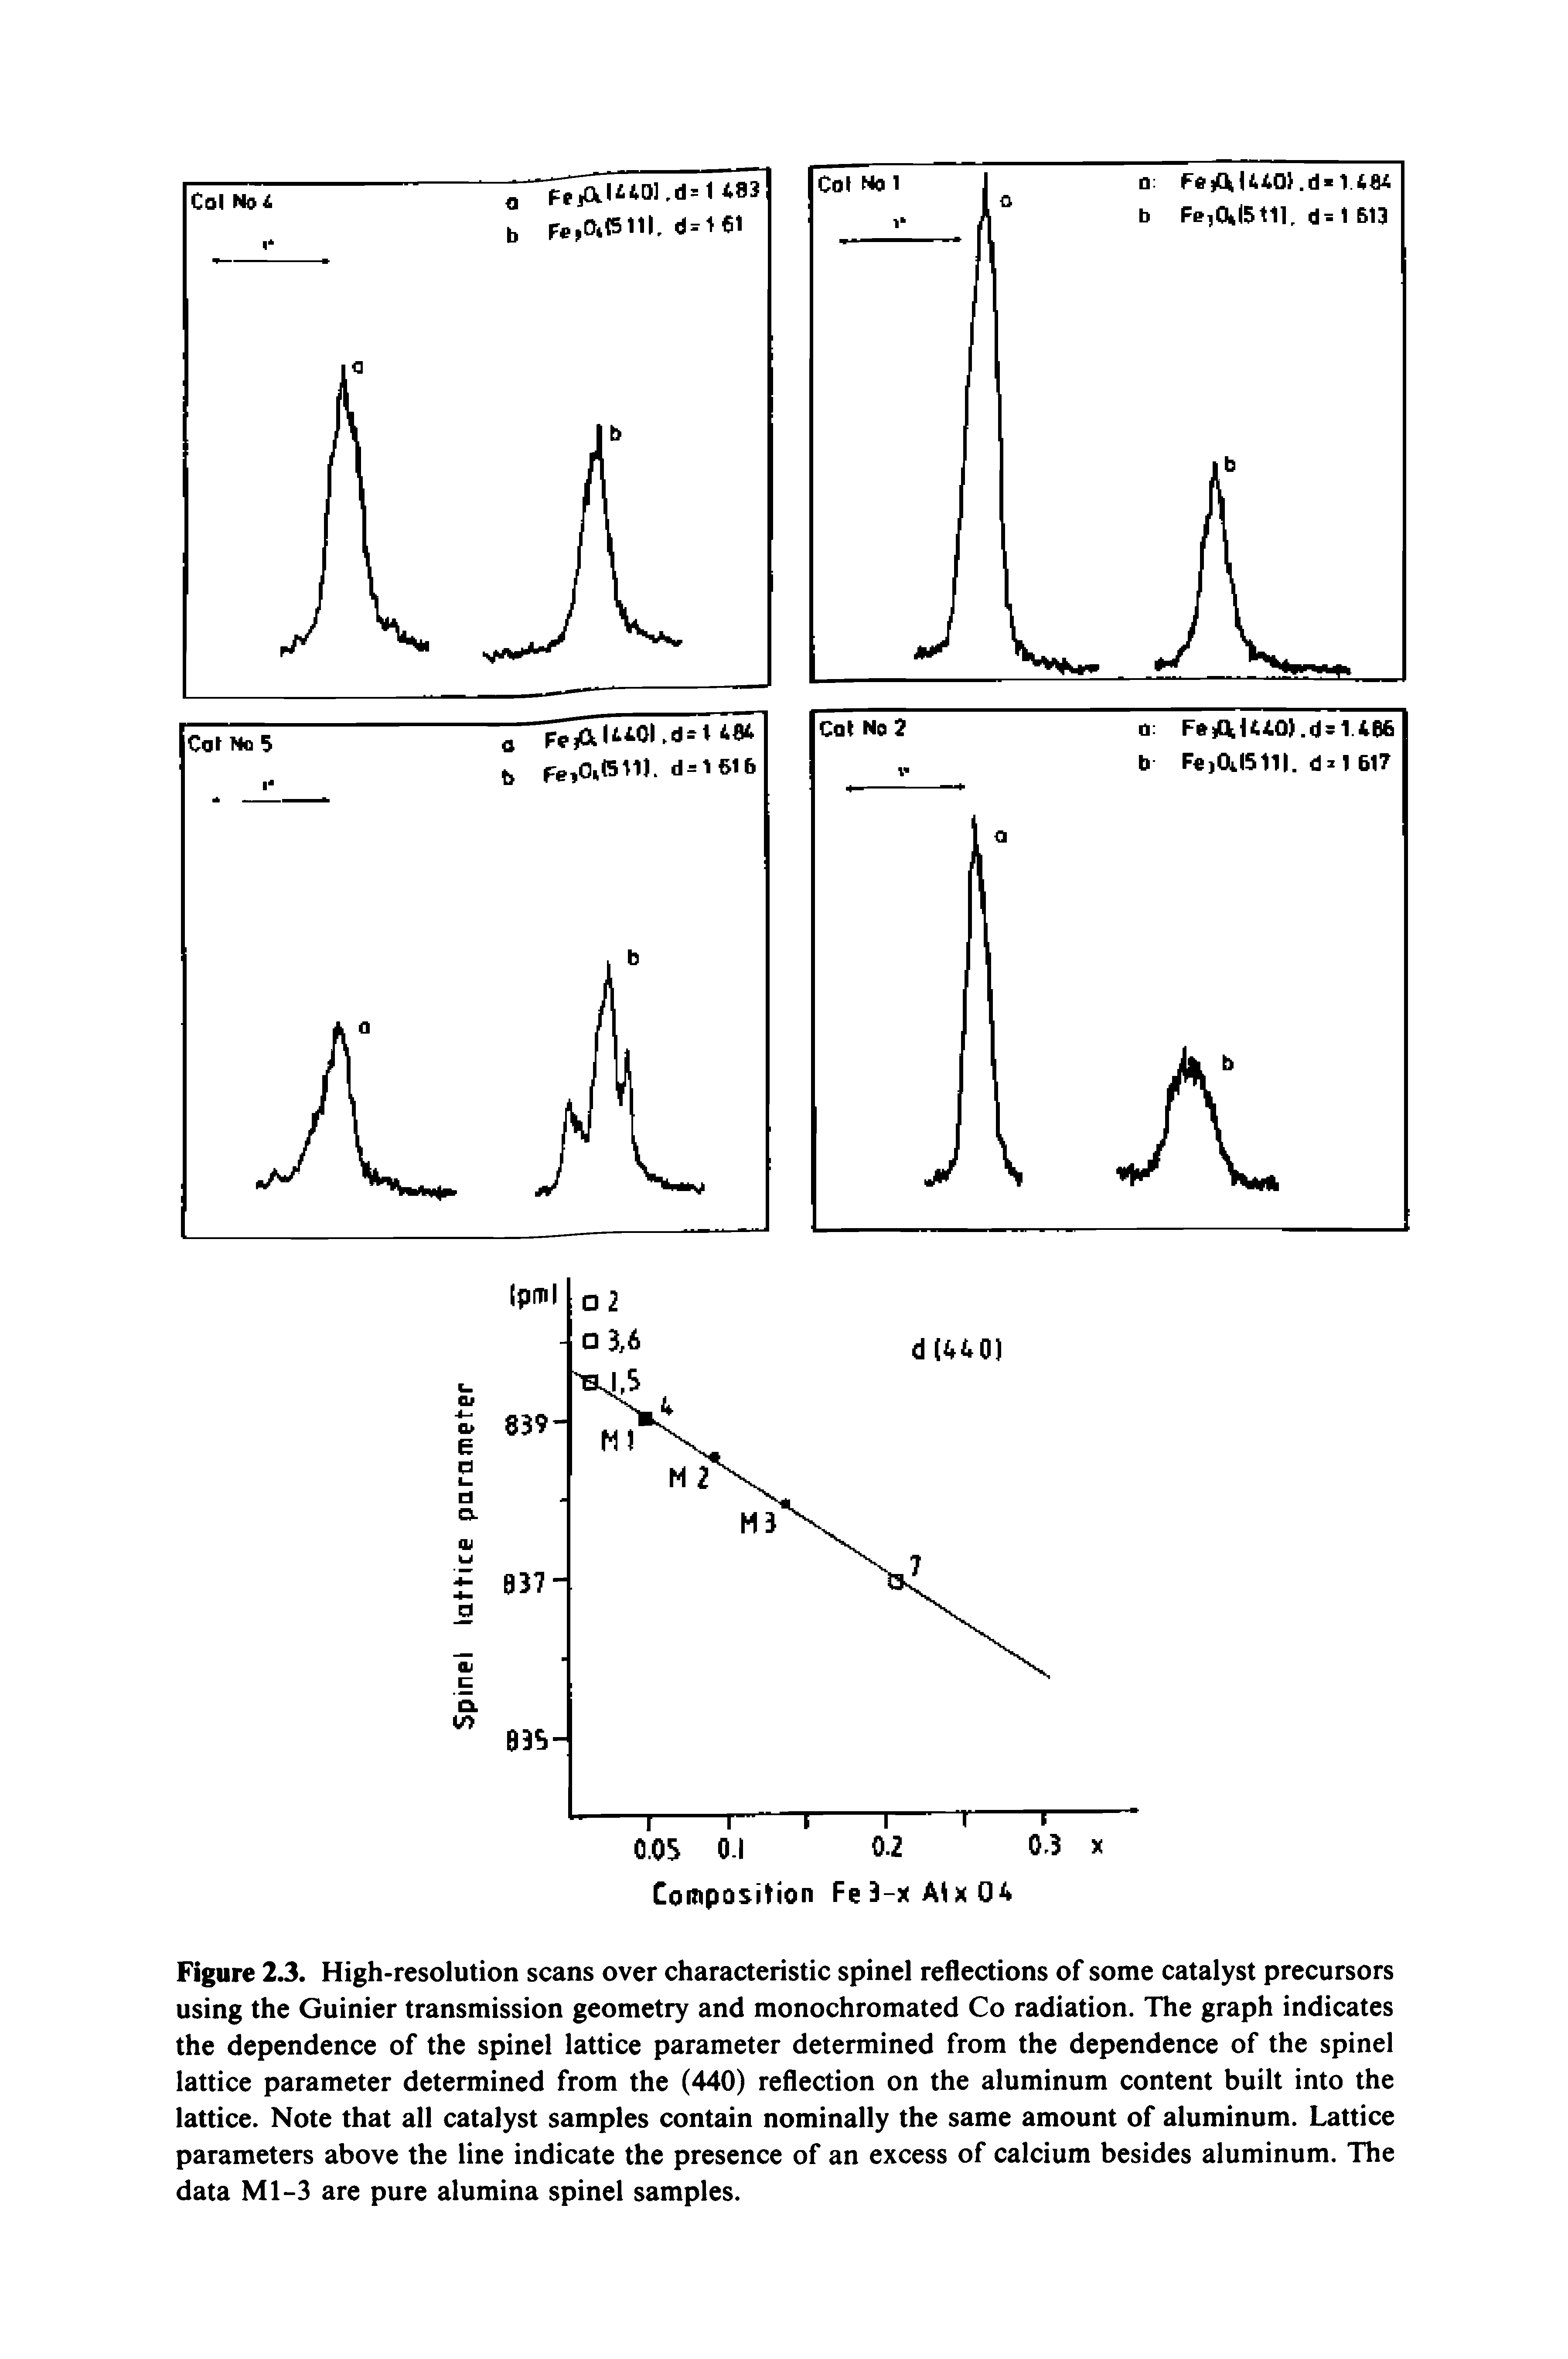 Figure 2.3. High-resolution scans over characteristic spinel reflections of some catalyst precursors using the Guinier transmission geometry and monochromated Co radiation. The graph indicates the dependence of the spinel lattice parameter determined from the dependence of the spinel lattice parameter determined from the (440) reflection on the aluminum content built into the lattice. Note that all catalyst samples contain nominally the same amount of aluminum. Lattice parameters above the line indicate the presence of an excess of calcium besides aluminum. The data Ml-3 are pure alumina spinel samples.